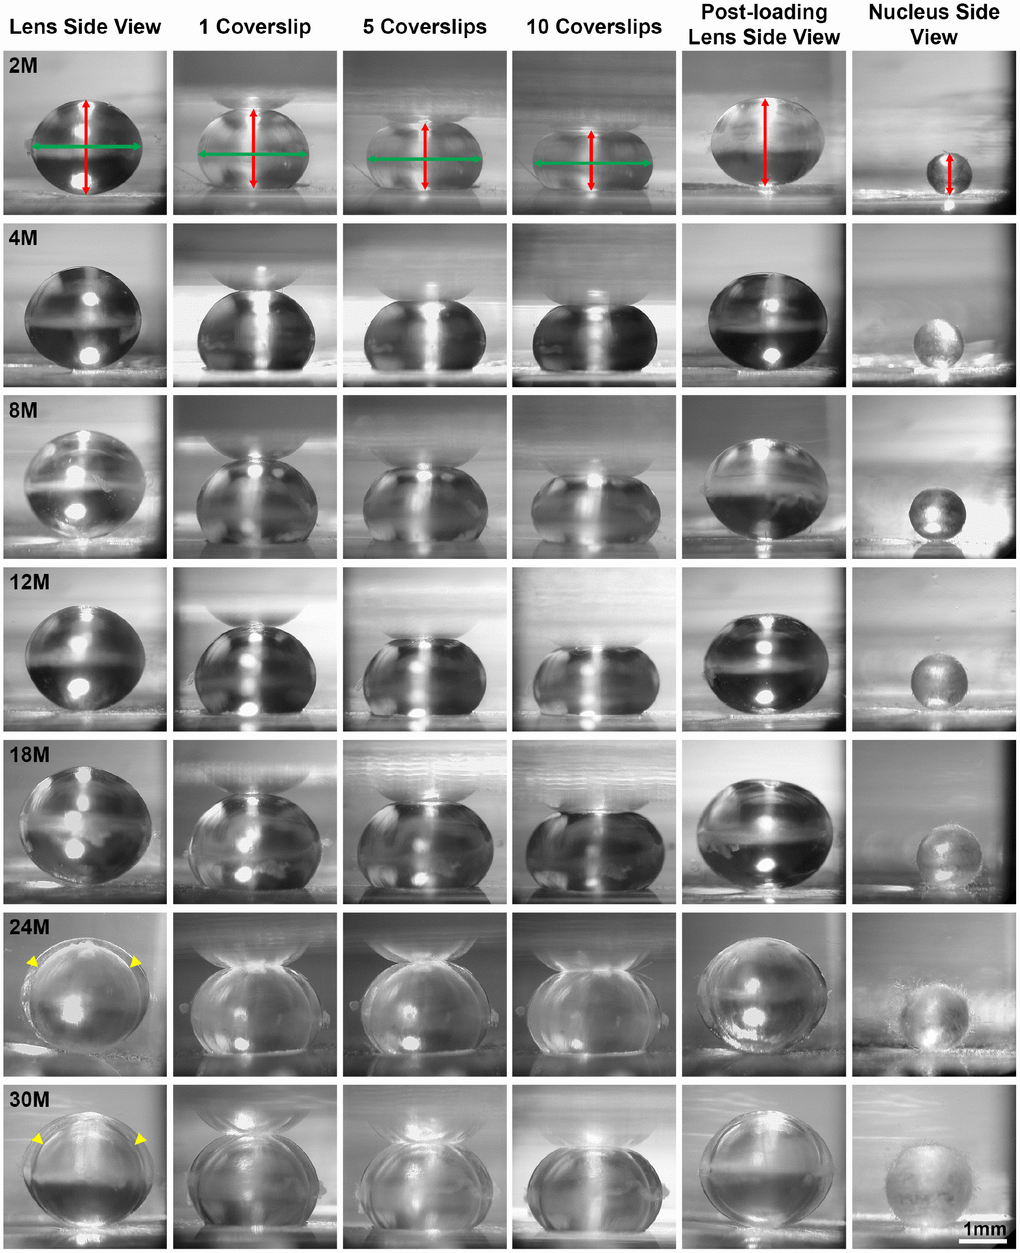 Side view pictures of mouse lenses between 2-30 months of age pre-compression, during coverslip compression (1, 5 and 10 coverslips) and post-compression, and the isolated lens nucleus. With age, the application of the same load compressed the older lenses less than young lenses. There is an overall increase in lens size and nucleus size with age. The axial diameter (red double-headed arrows) and the equatorial diameter (green double-headed arrows) for each lens were measured to calculate lens volume, lens aspect ratio, axial compressive strain, equatorial expansion strain, resilience and nuclear volume. In very old lenses (24-30 months), there is an area of optical discontinuity in the lens cortex (yellow arrowheads). Scale bar, 1mm.